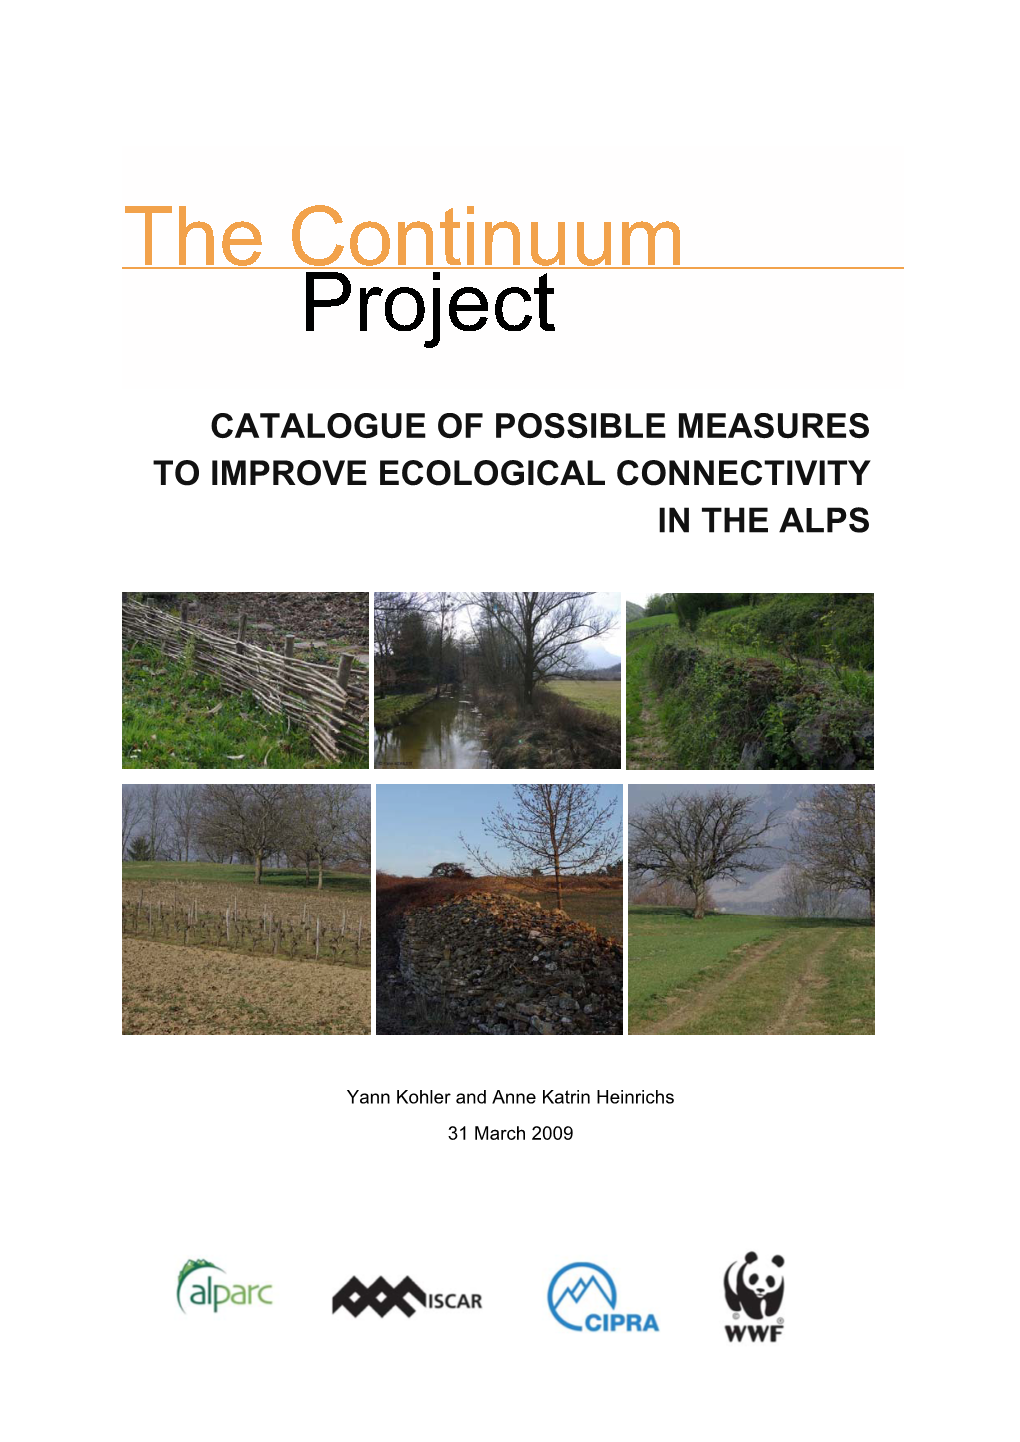 Catalogue of Possible Measures to Improve Ecological Connectivity in the Alps